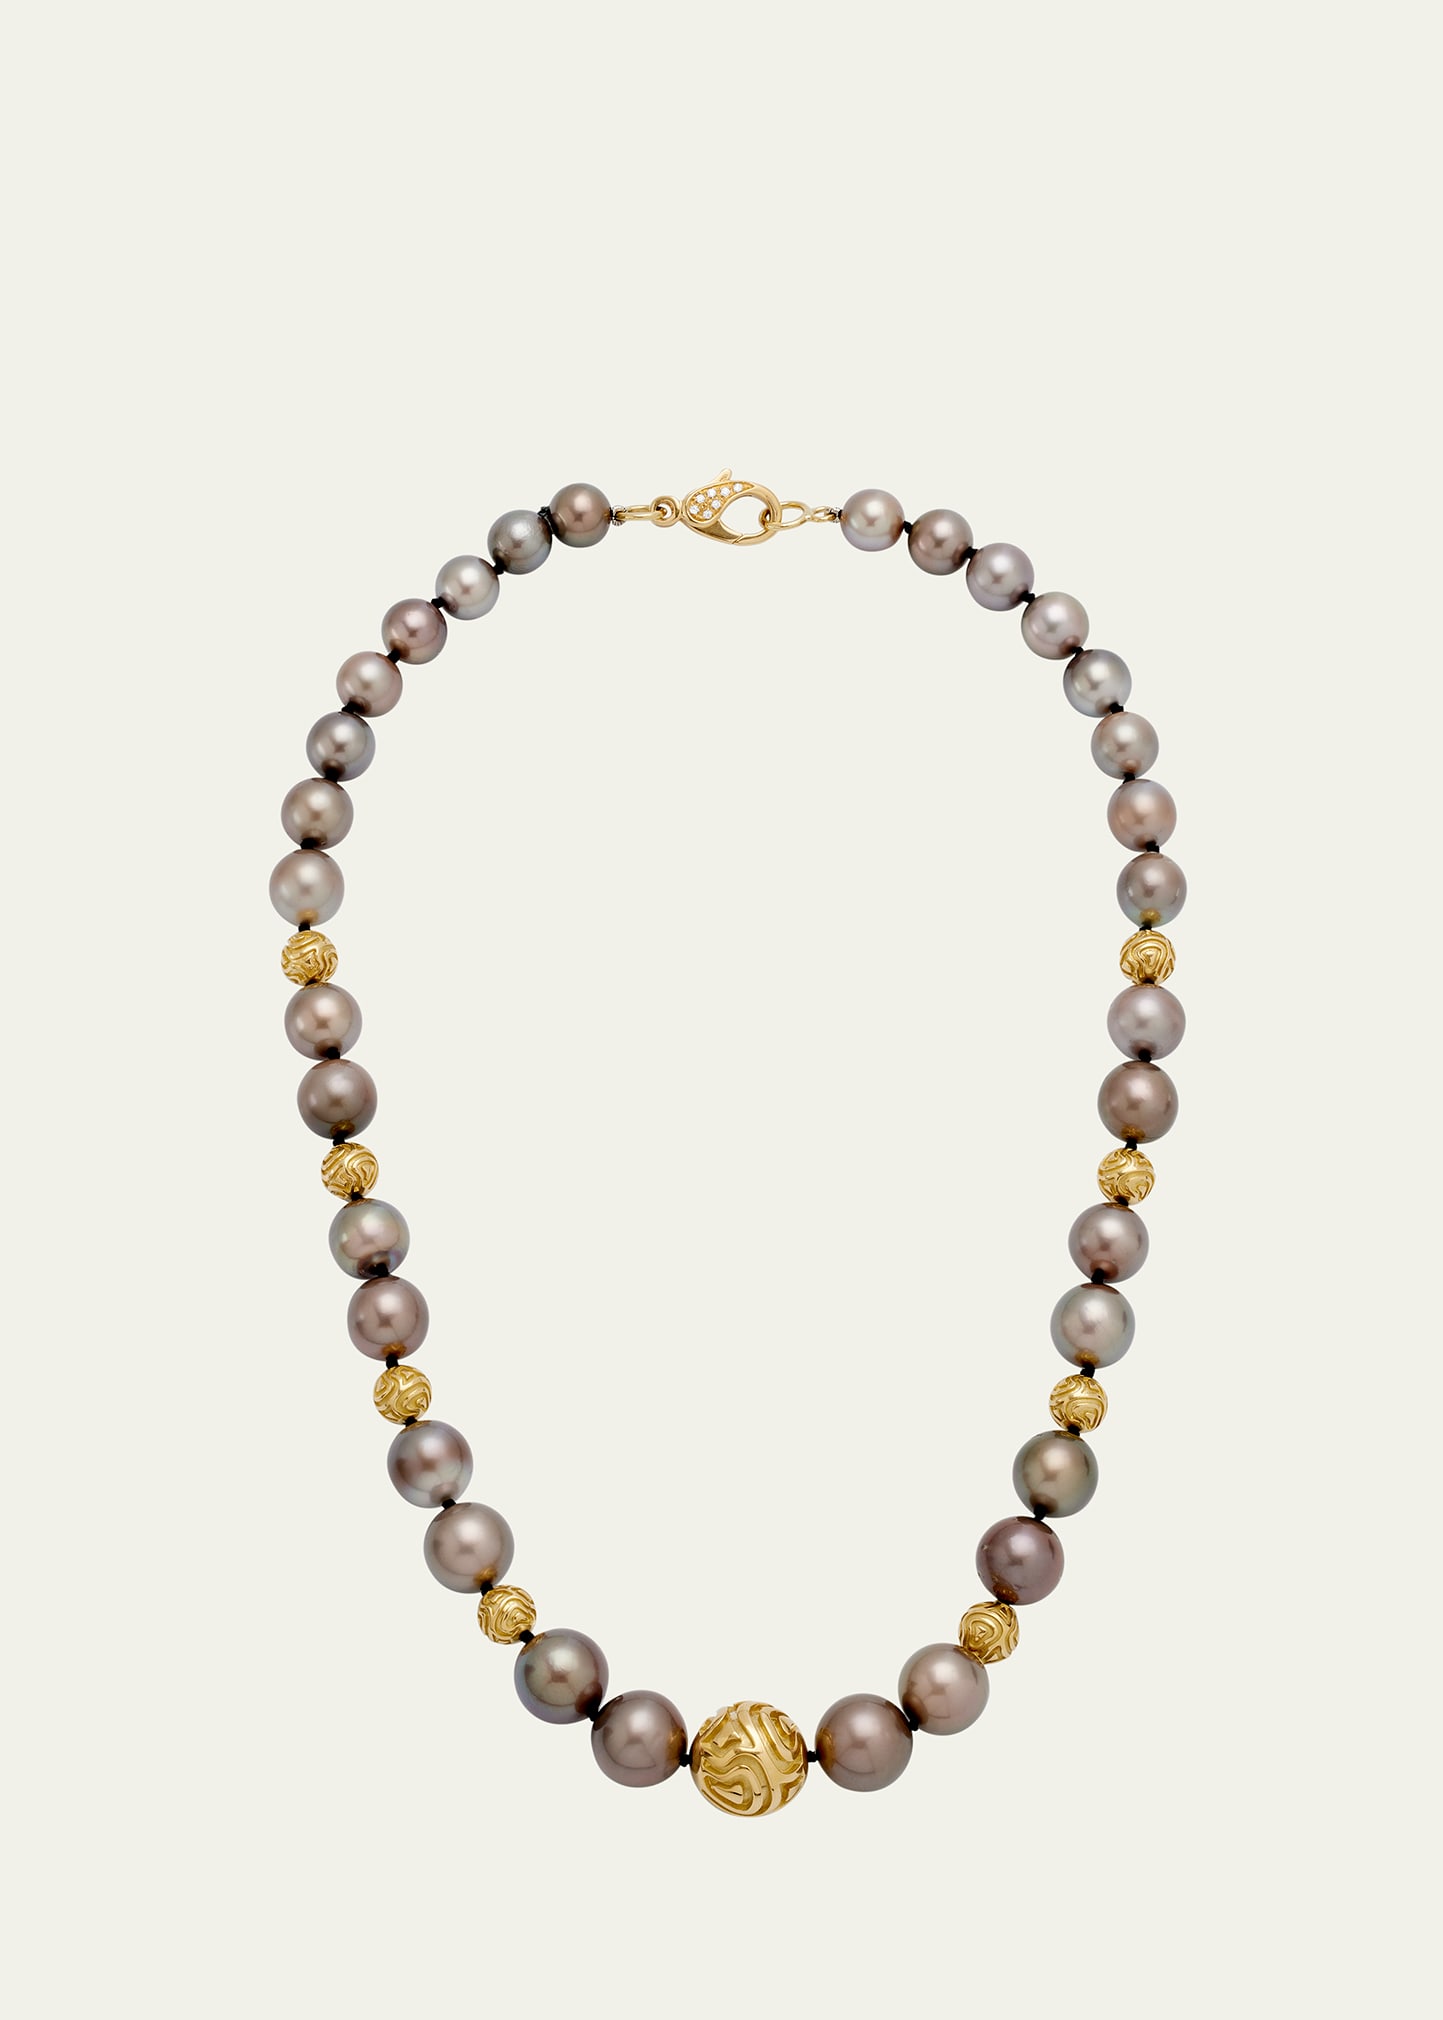 Gold Bead Necklace with Pearl, Agate, and Diamonds